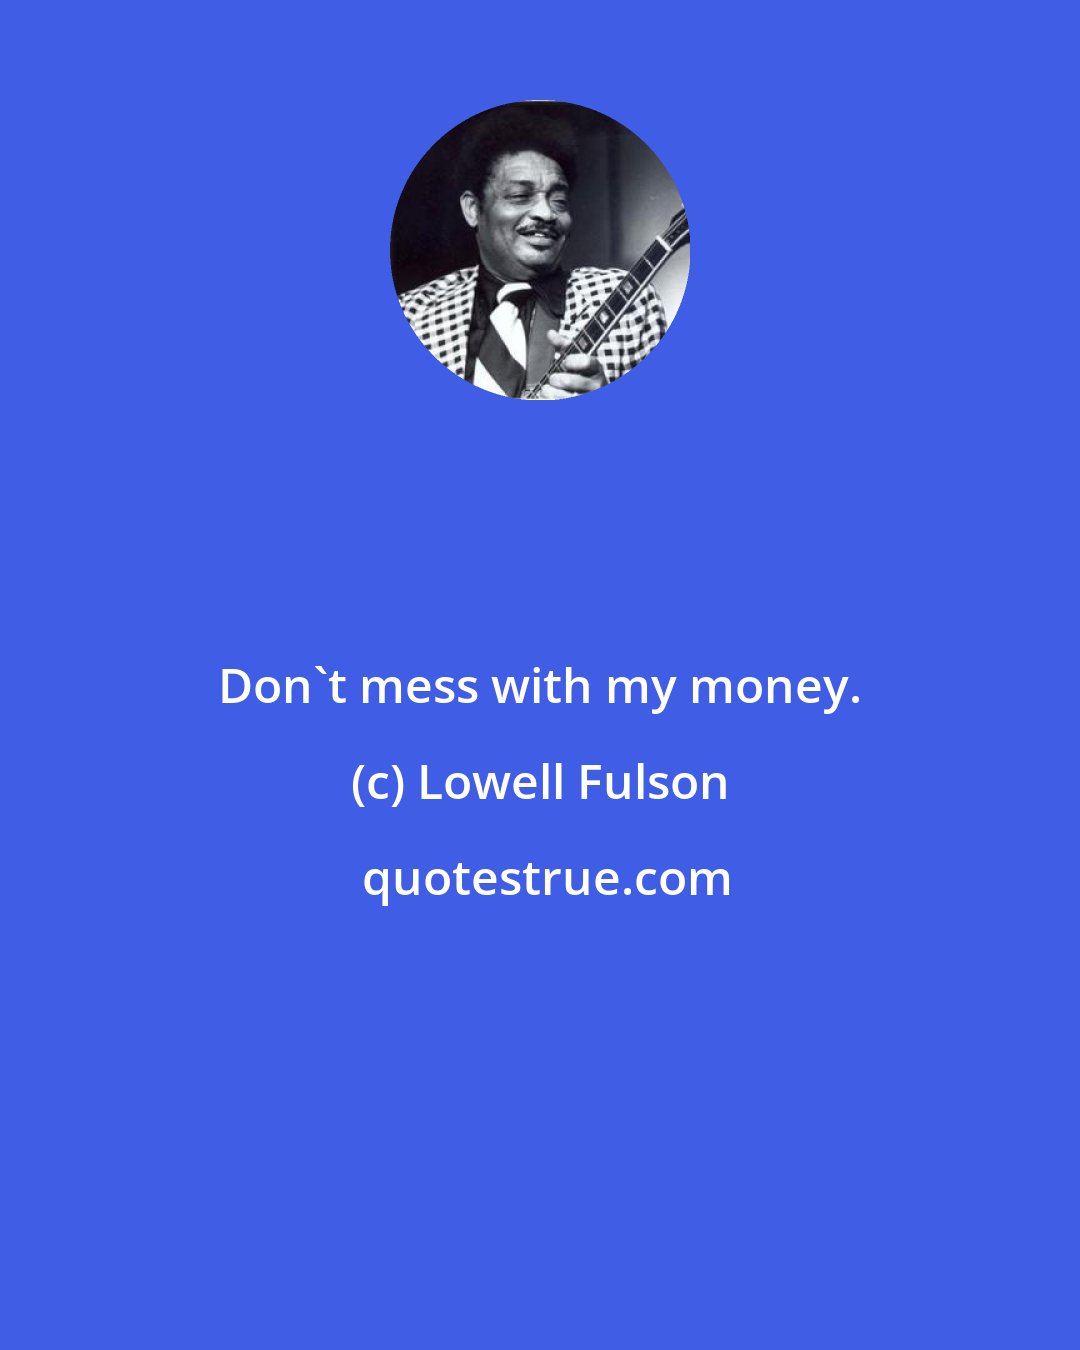 Lowell Fulson: Don't mess with my money.